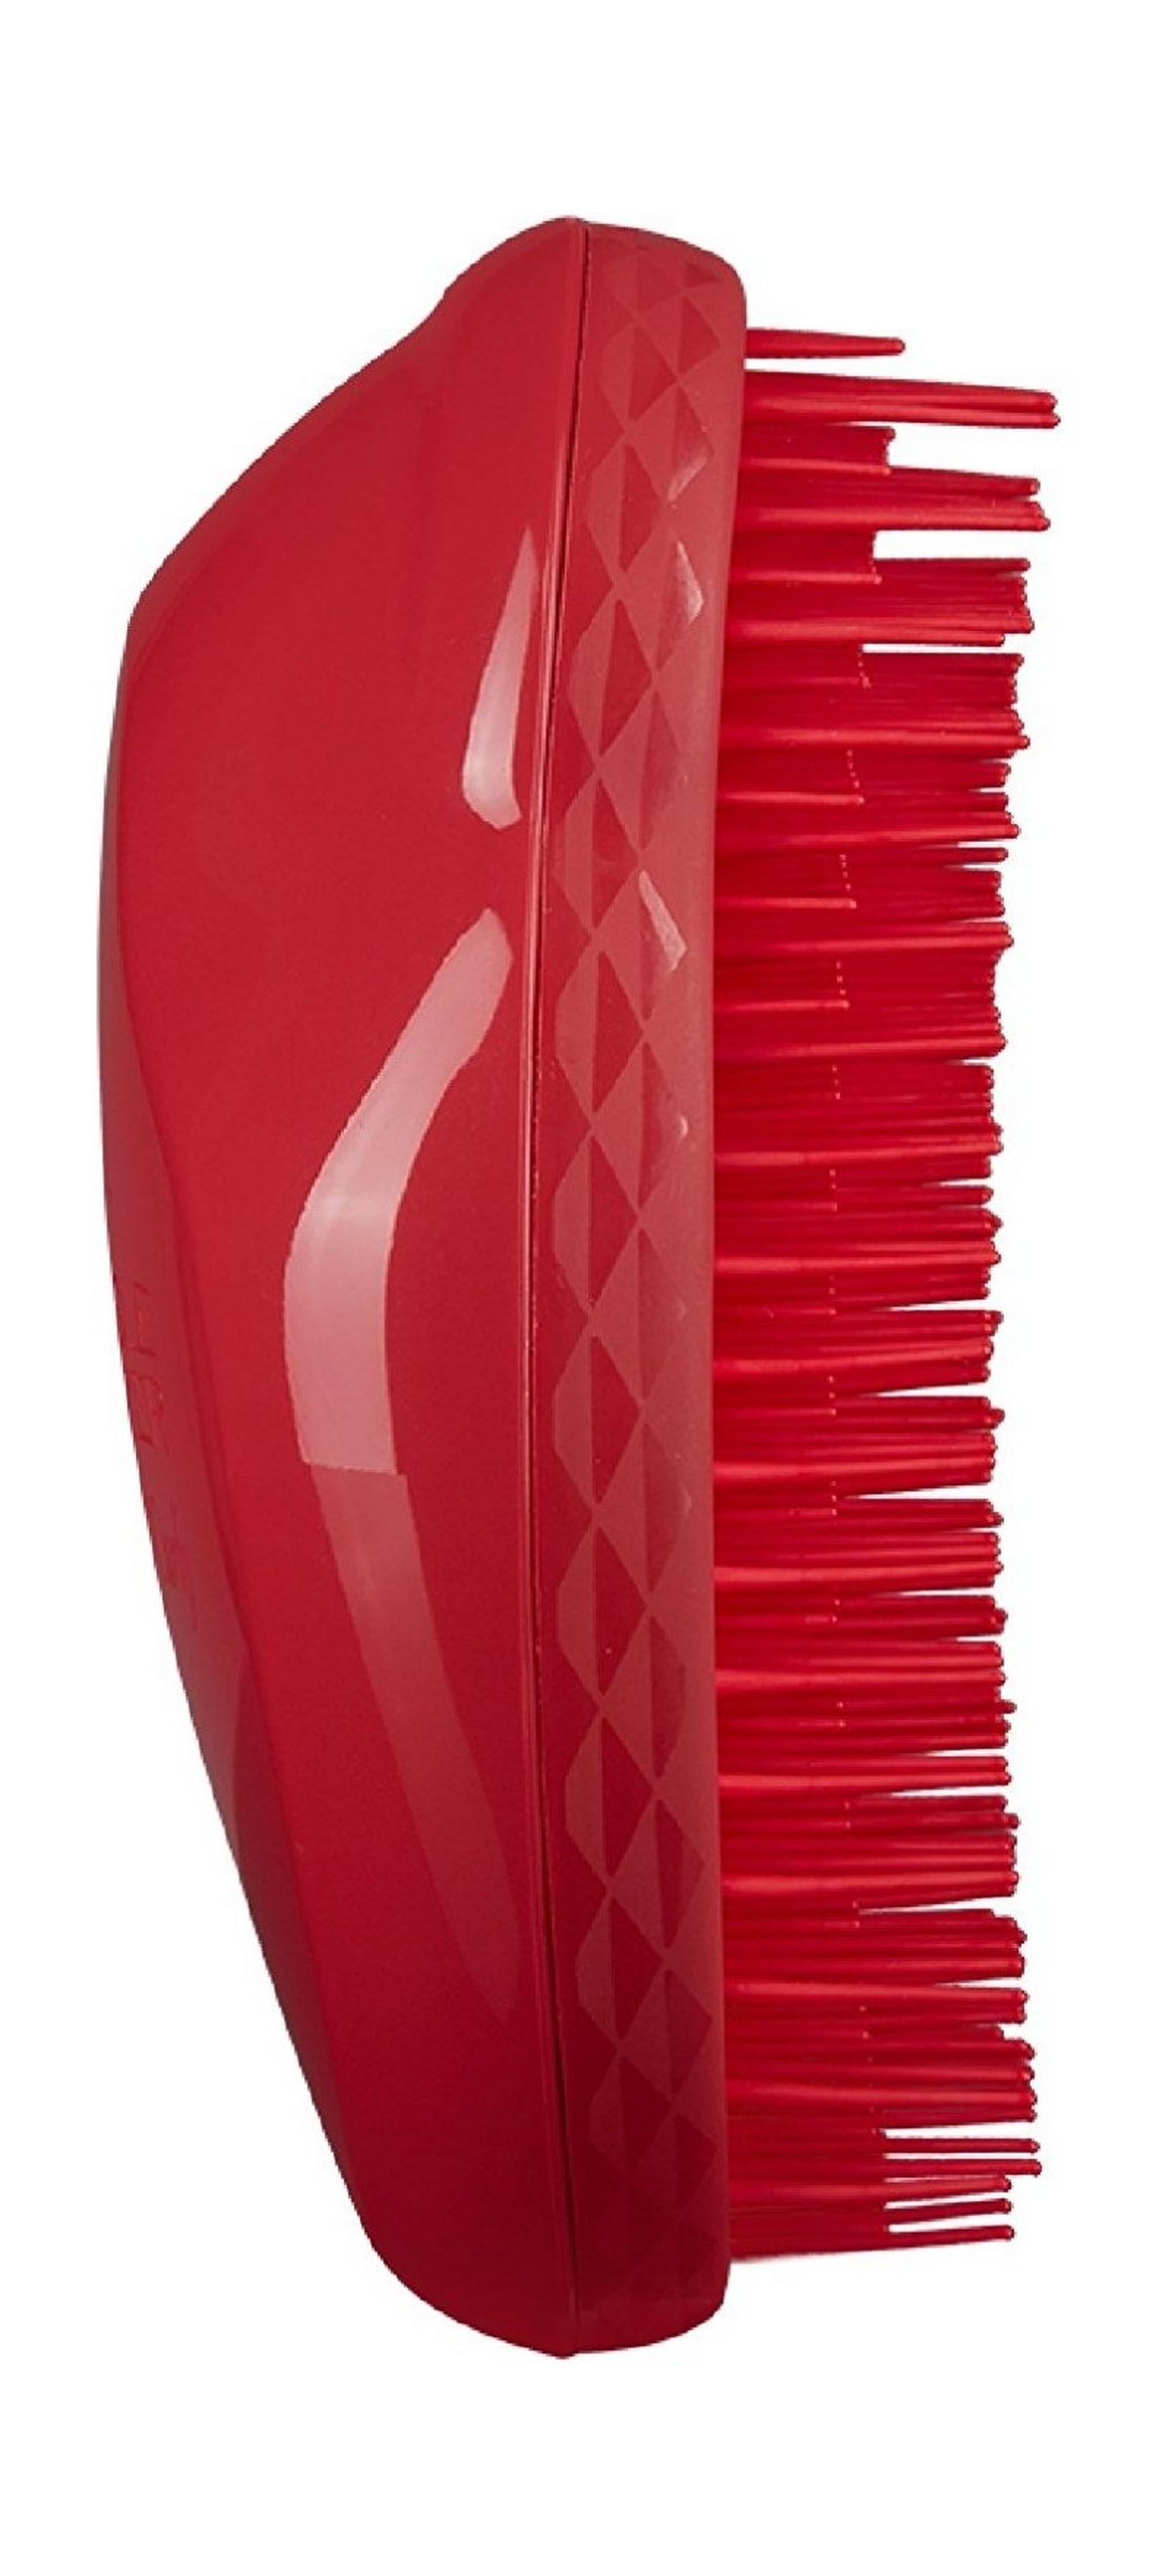 Tangle Teezer Thick & Curly Salsa - Red